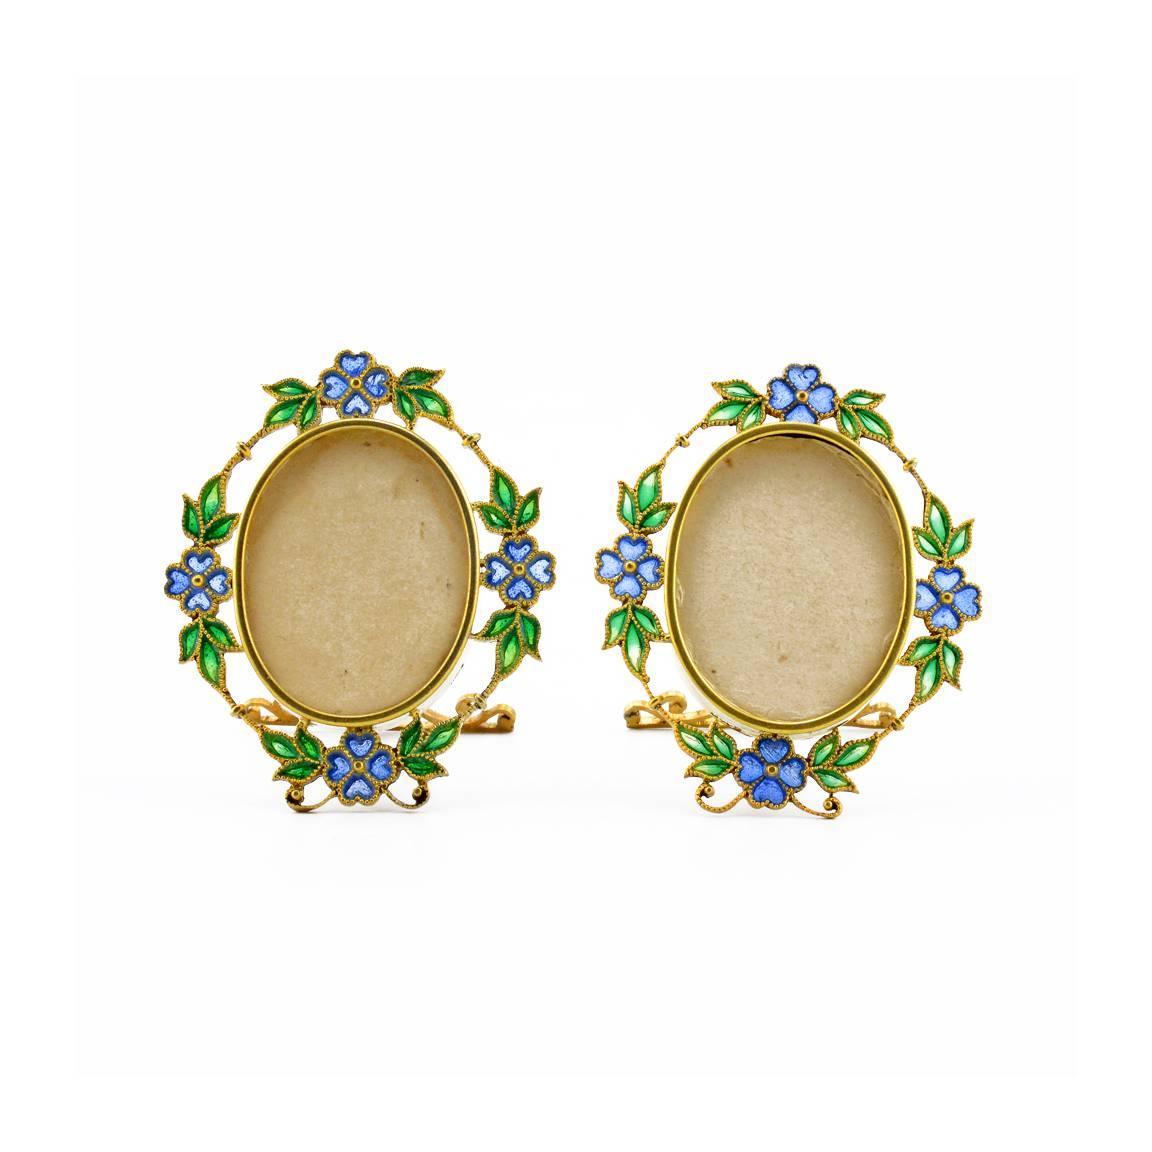 An exquisite pair of Austrian gilded silver and plique-à-jour enamel miniature photograph frames, Georg Adam Scheid, Vienna, circa 1890. The oval frames applied with a border of blue flowers and green foliage in plique-à-jour enamel connected with a